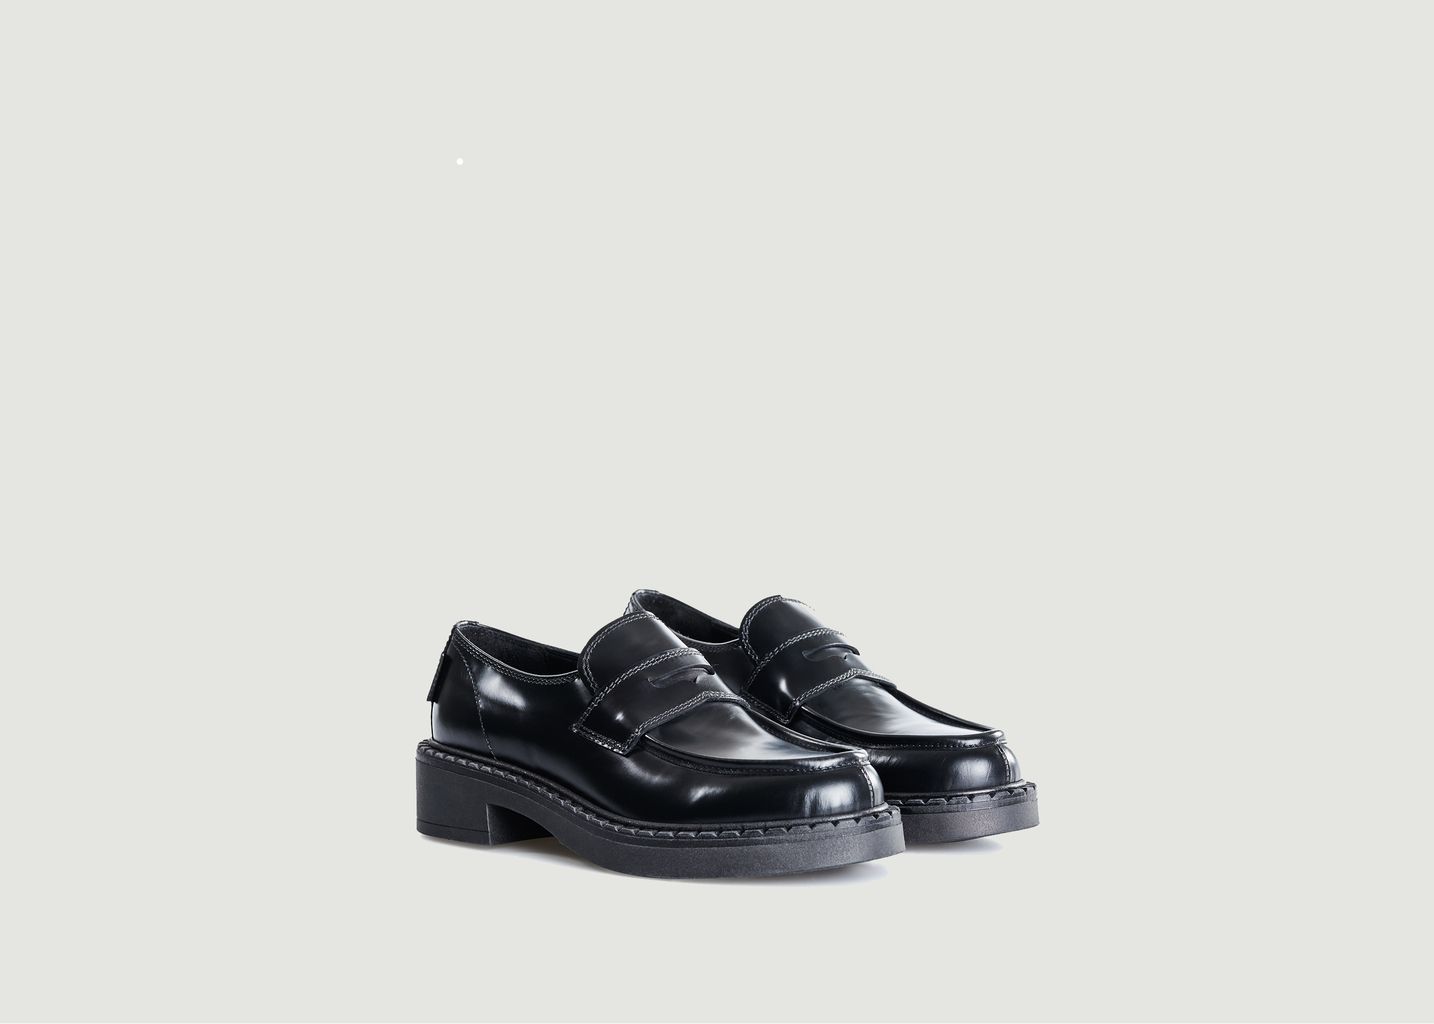 Albany II leather loafers - G.H.Bass